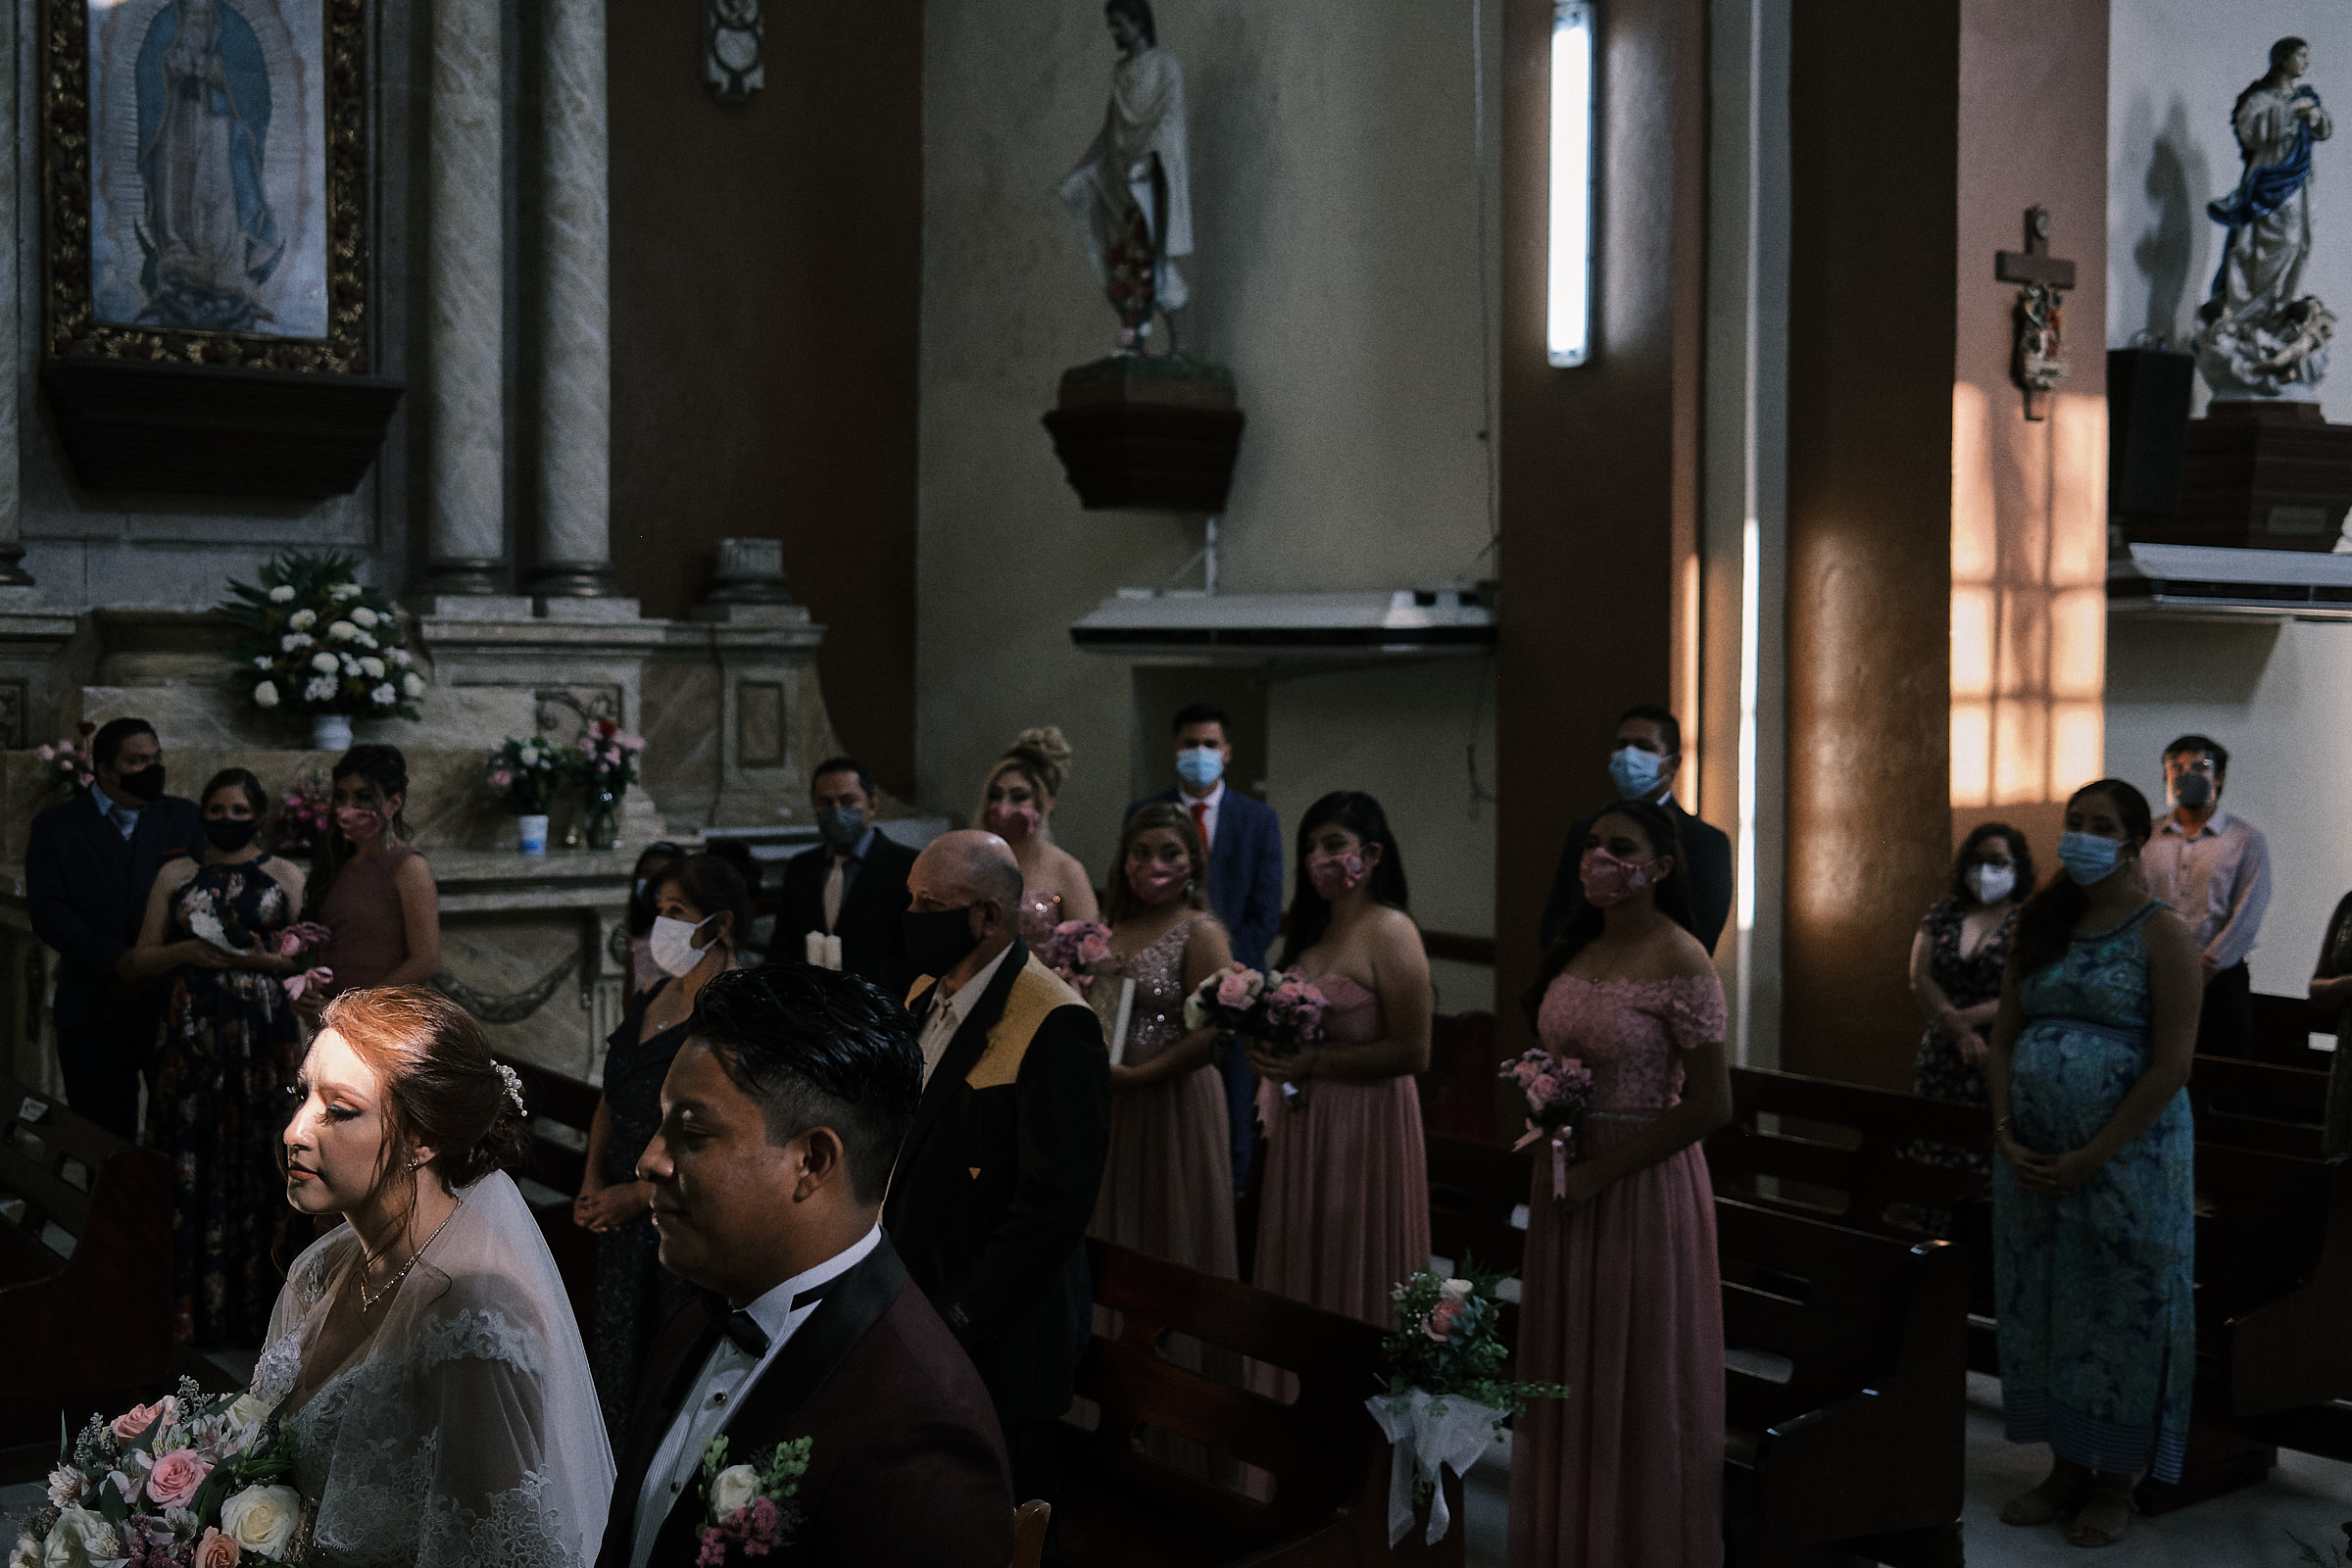 Light Enters Through A Window And Falls On Bride During Ceremony In Tampico Mexico